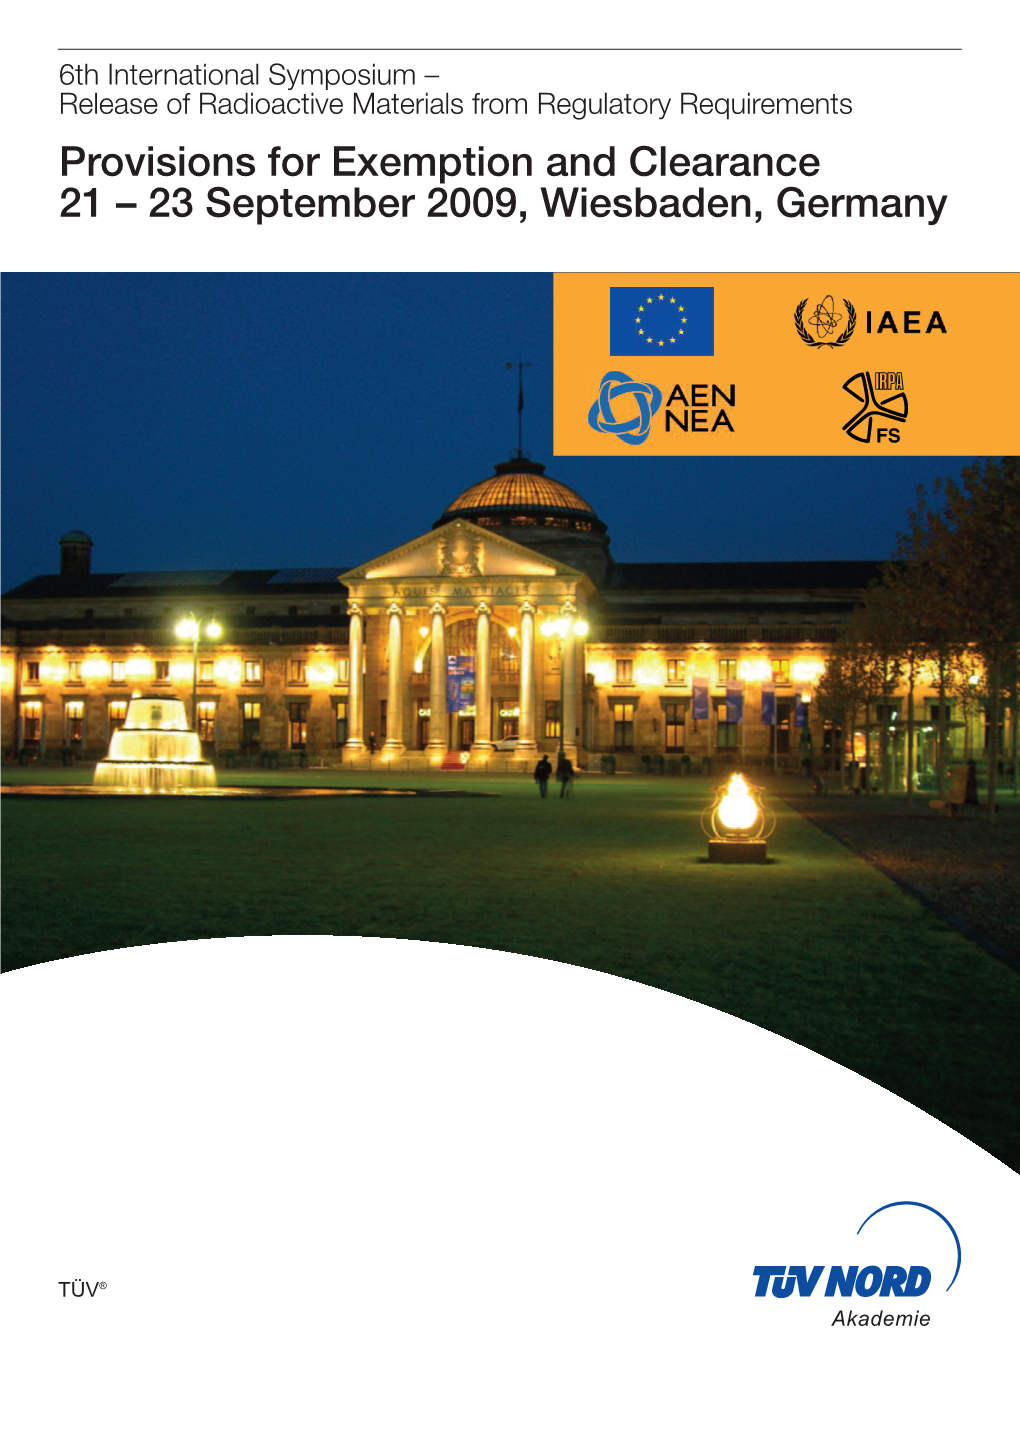 Provisions for Exemption and Clearance 21 – 23 September 2009, Wiesbaden, Germany